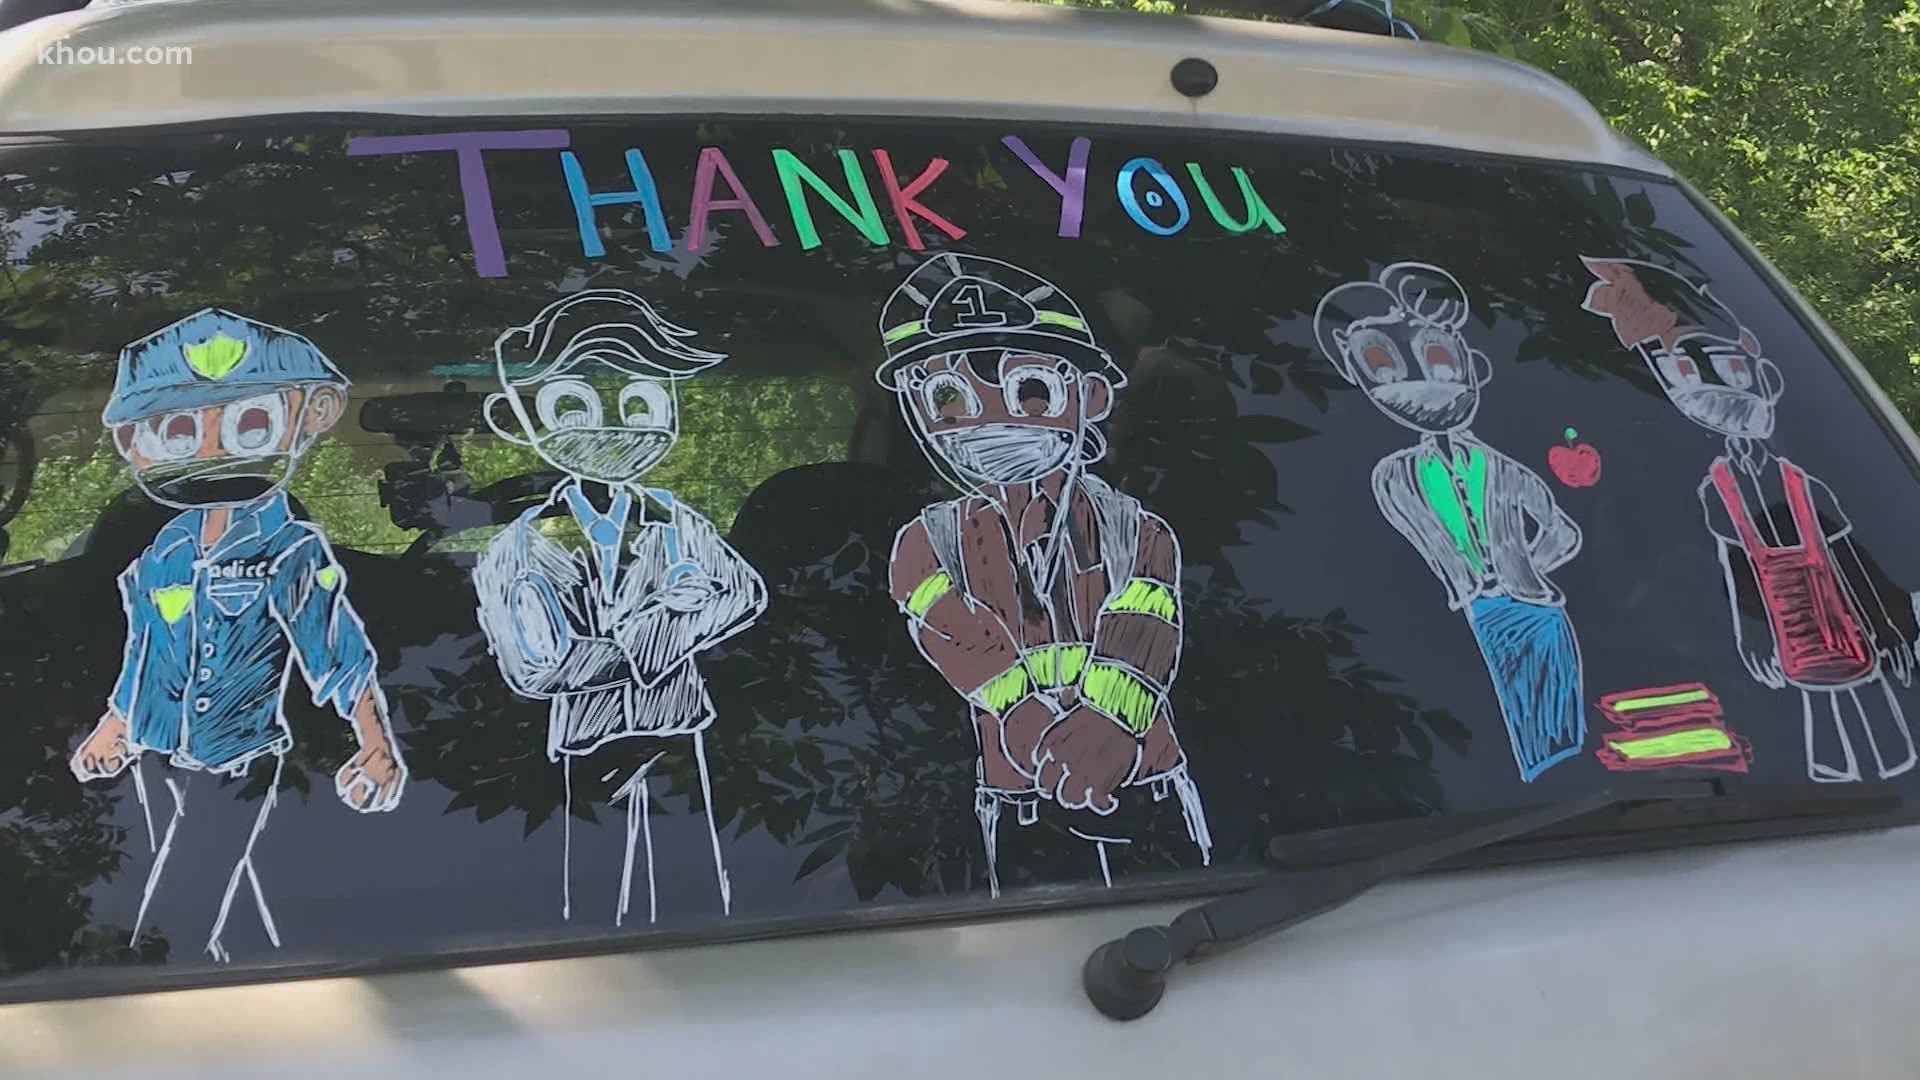 Adrian Dean loves to draw. He can spend hours sketching. He's now drawing on car windows. Neighbors are taking notice and hiring him for jobs.